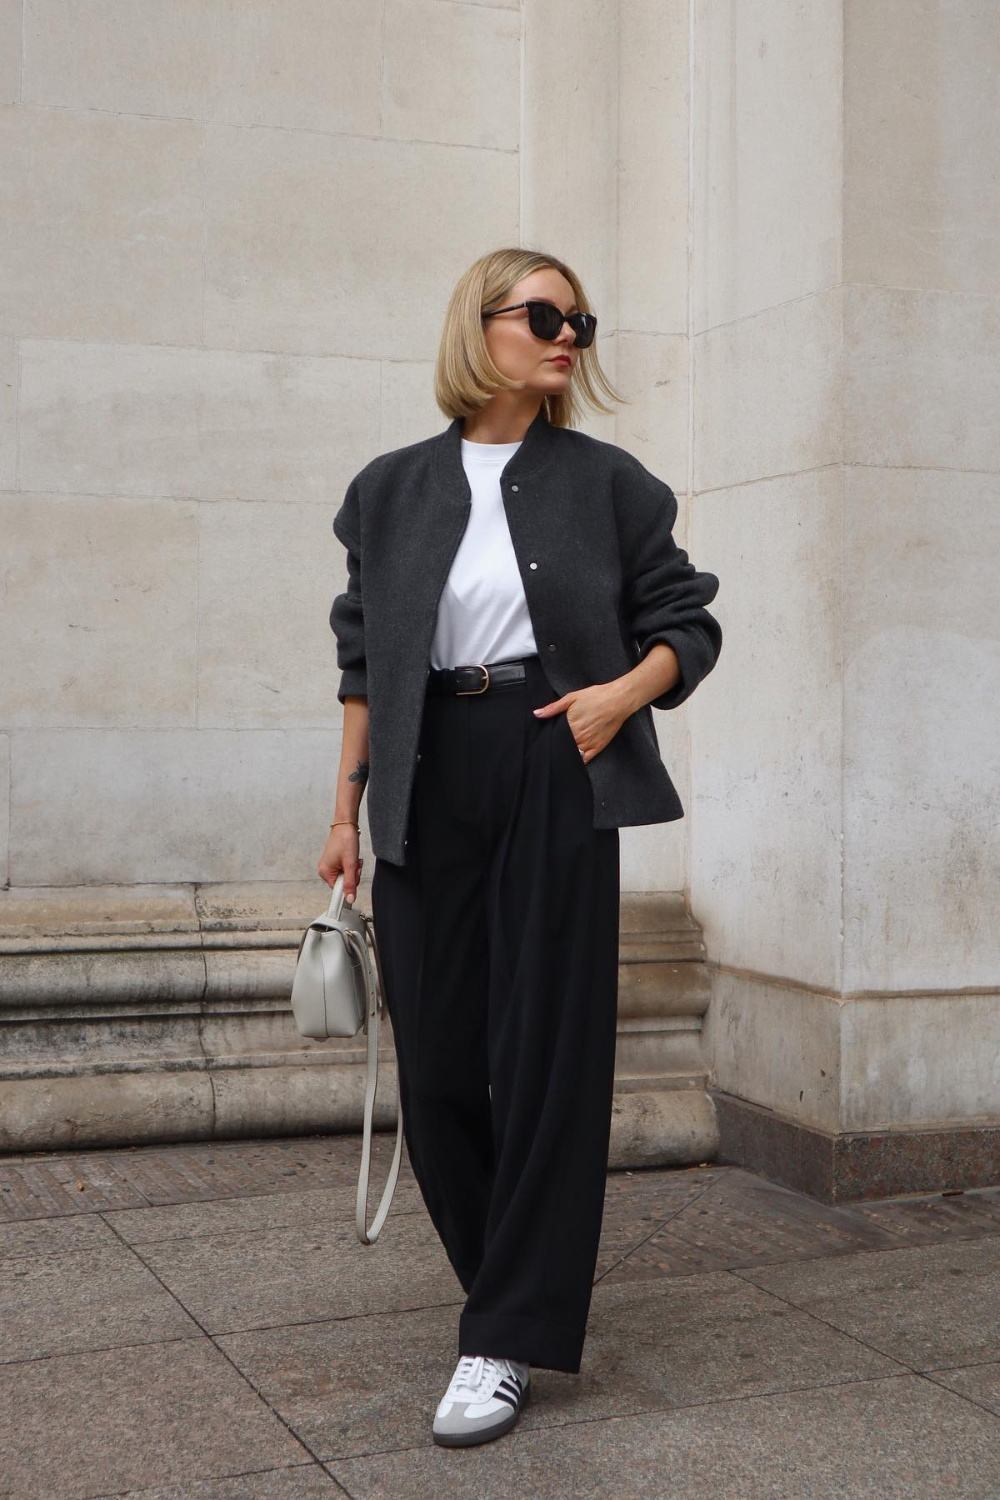 Bomber jacket outfit with trouser and tshirt